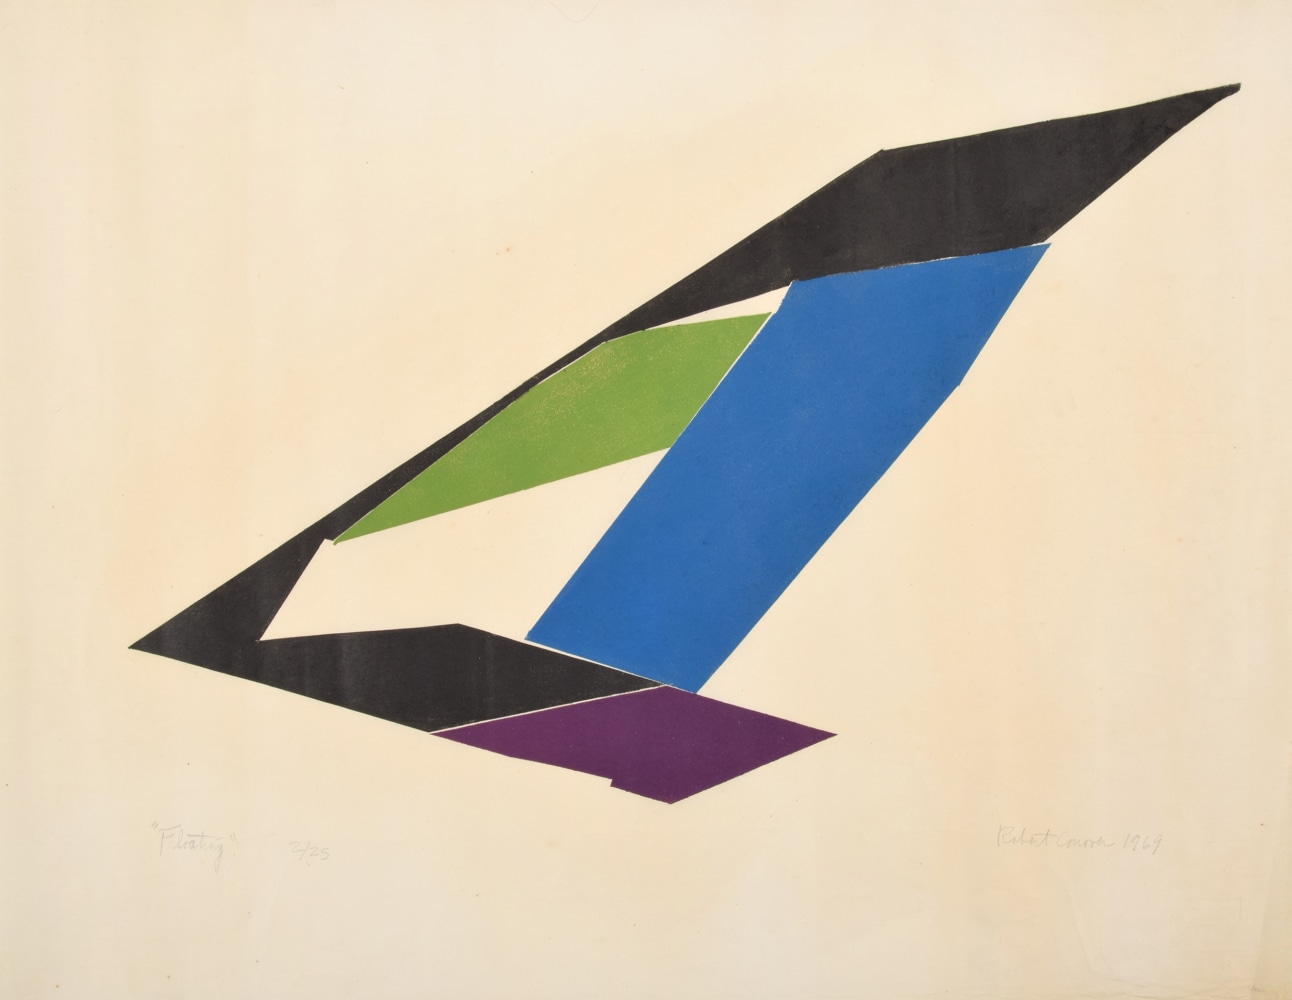 Roert Conover, Floating, 1969, color screenprint on paper, 26.25 x 24.5 inches, ed 2_25, Robert Conover artworks for sale